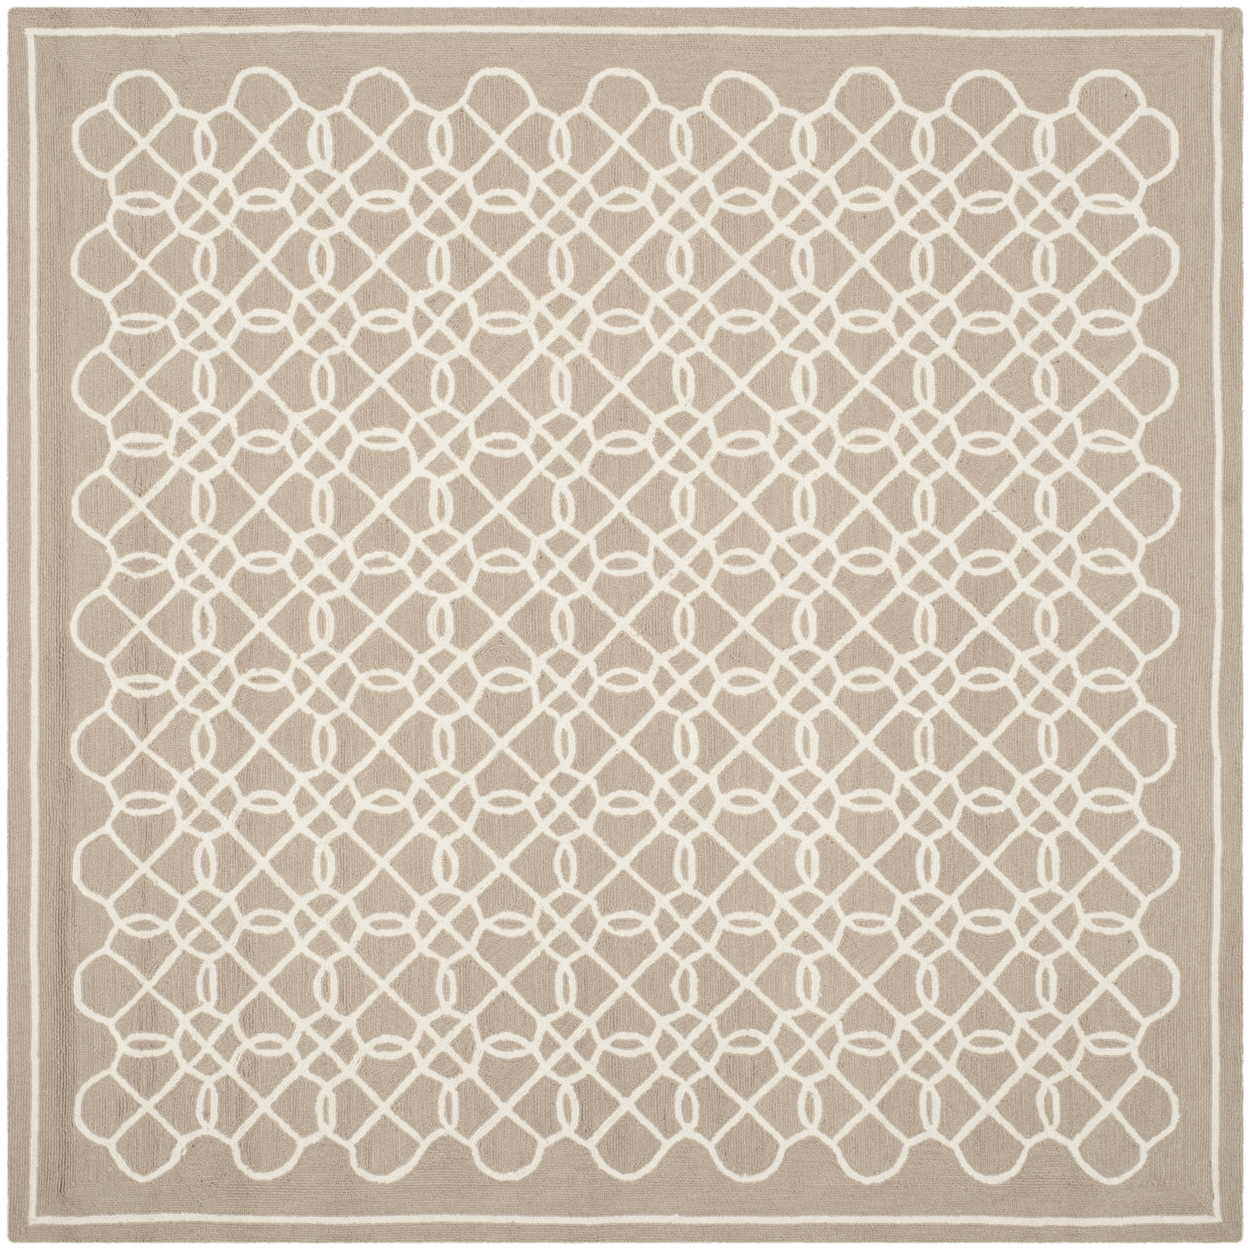 SAFAVIEH Chelsea HK739A Hand-hooked Tan / Ivory Rug - 6' Square